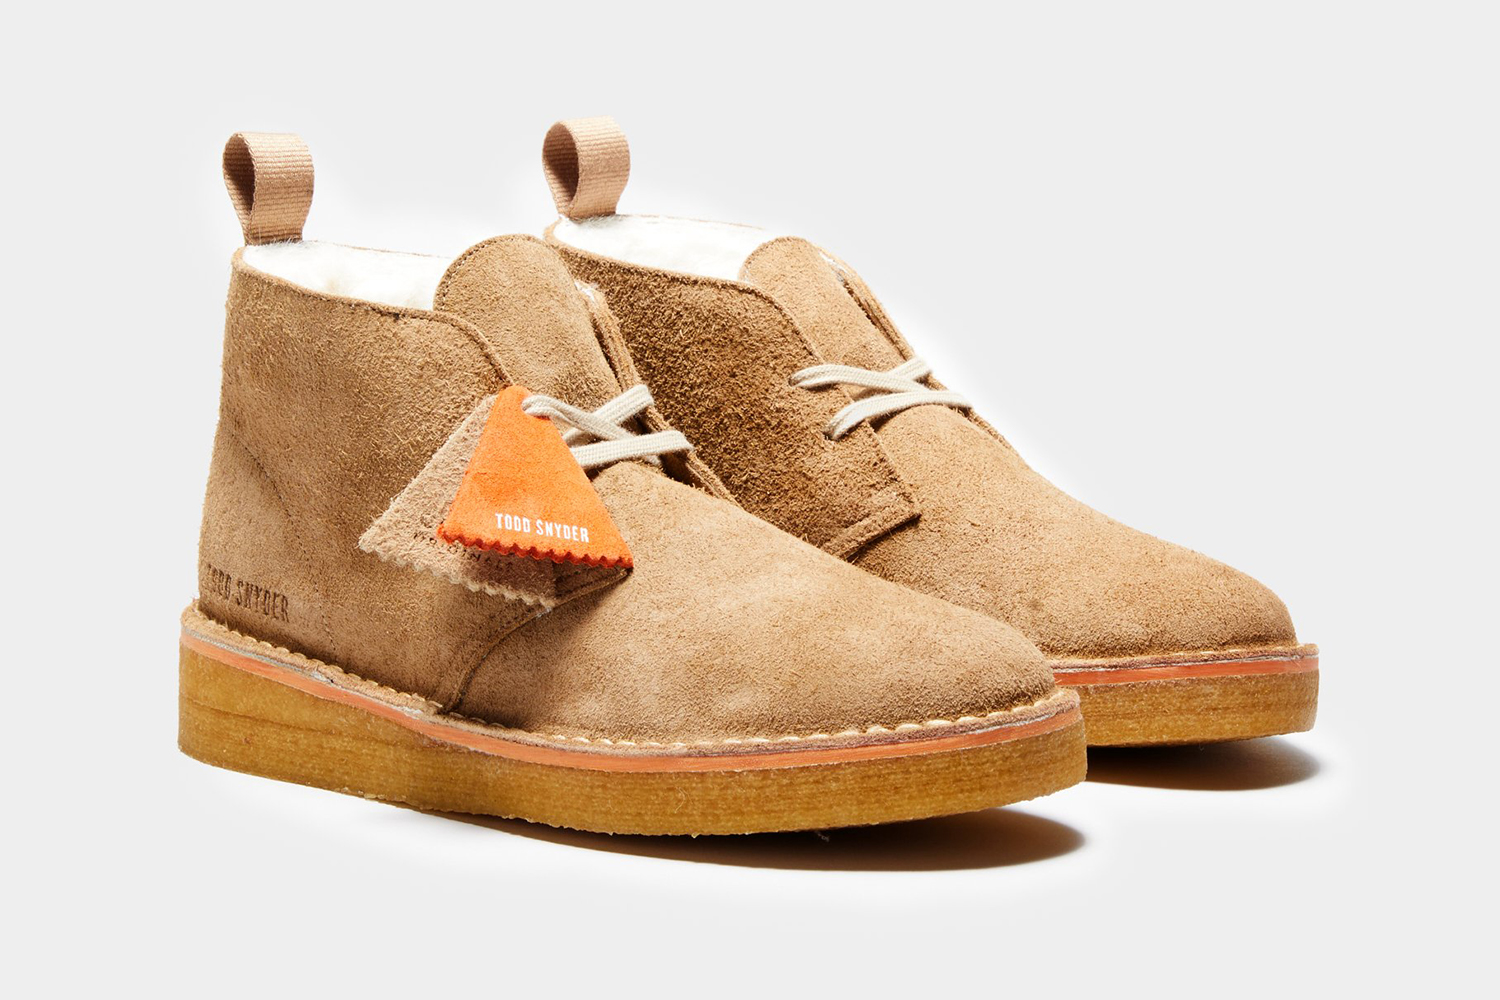 Todd Snyder x Clarks Shearling Desert Boot in Brown